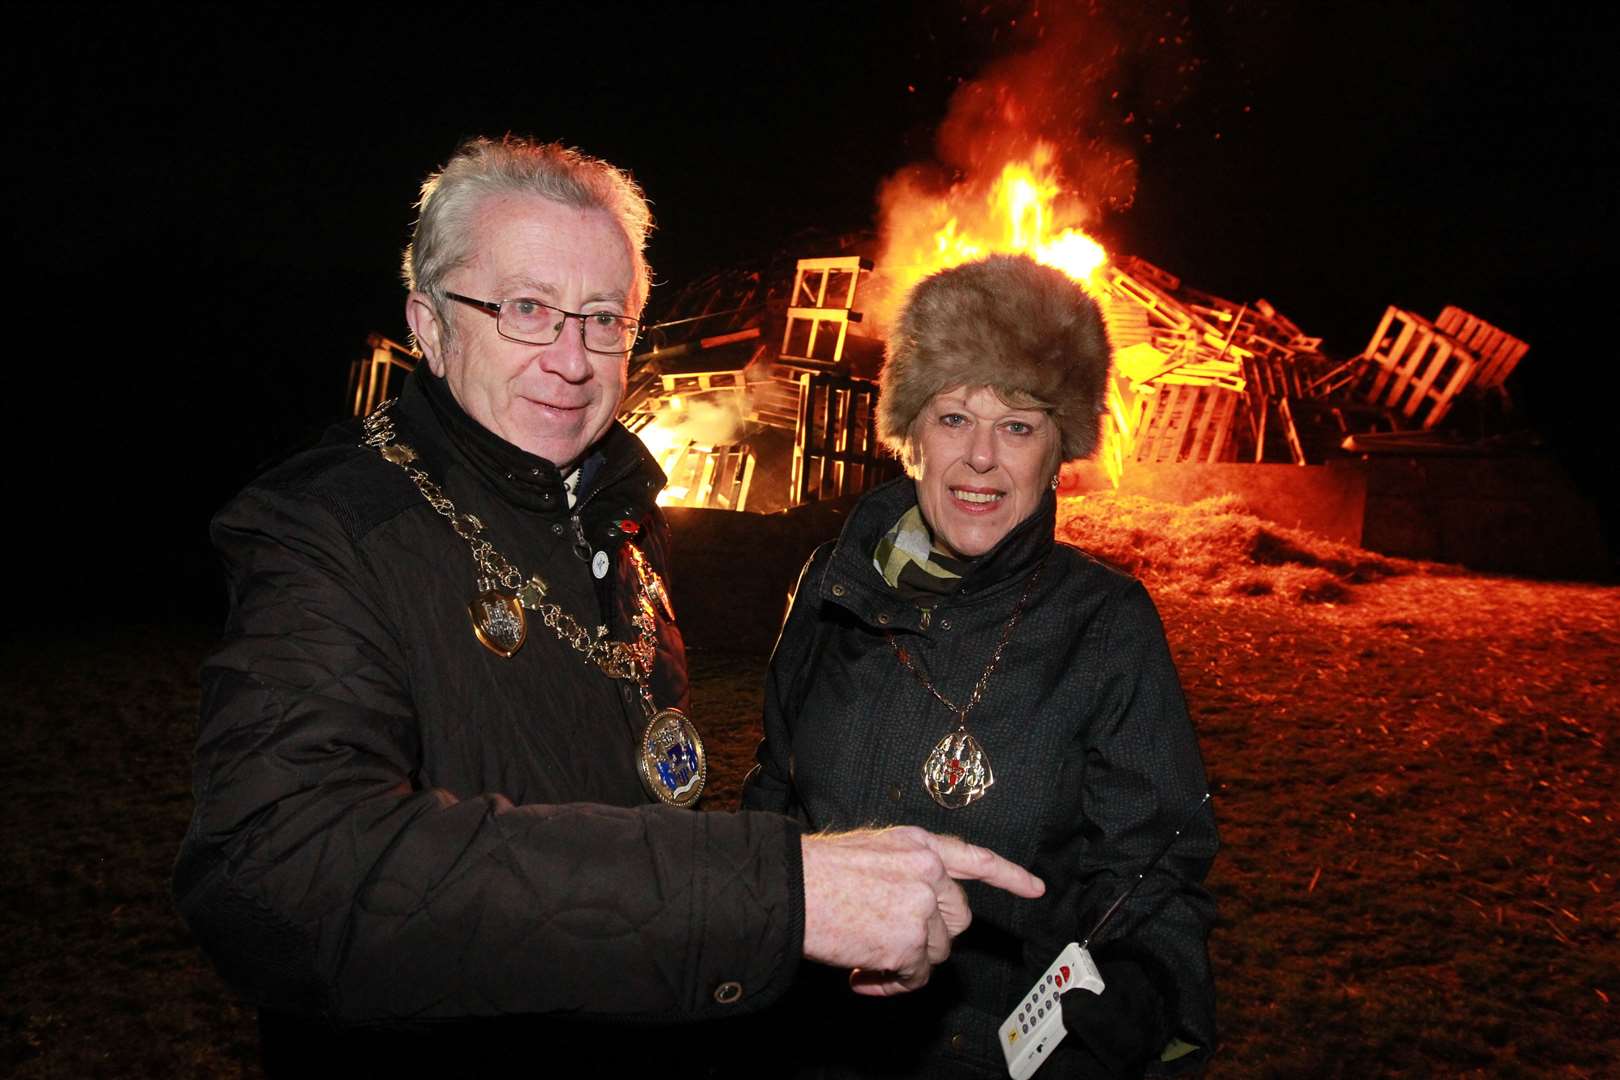 The bonfire in 2018 when it was lit by Mayor of Medway at the time Cllr Steve Ilse and Mayoress Josie Iles